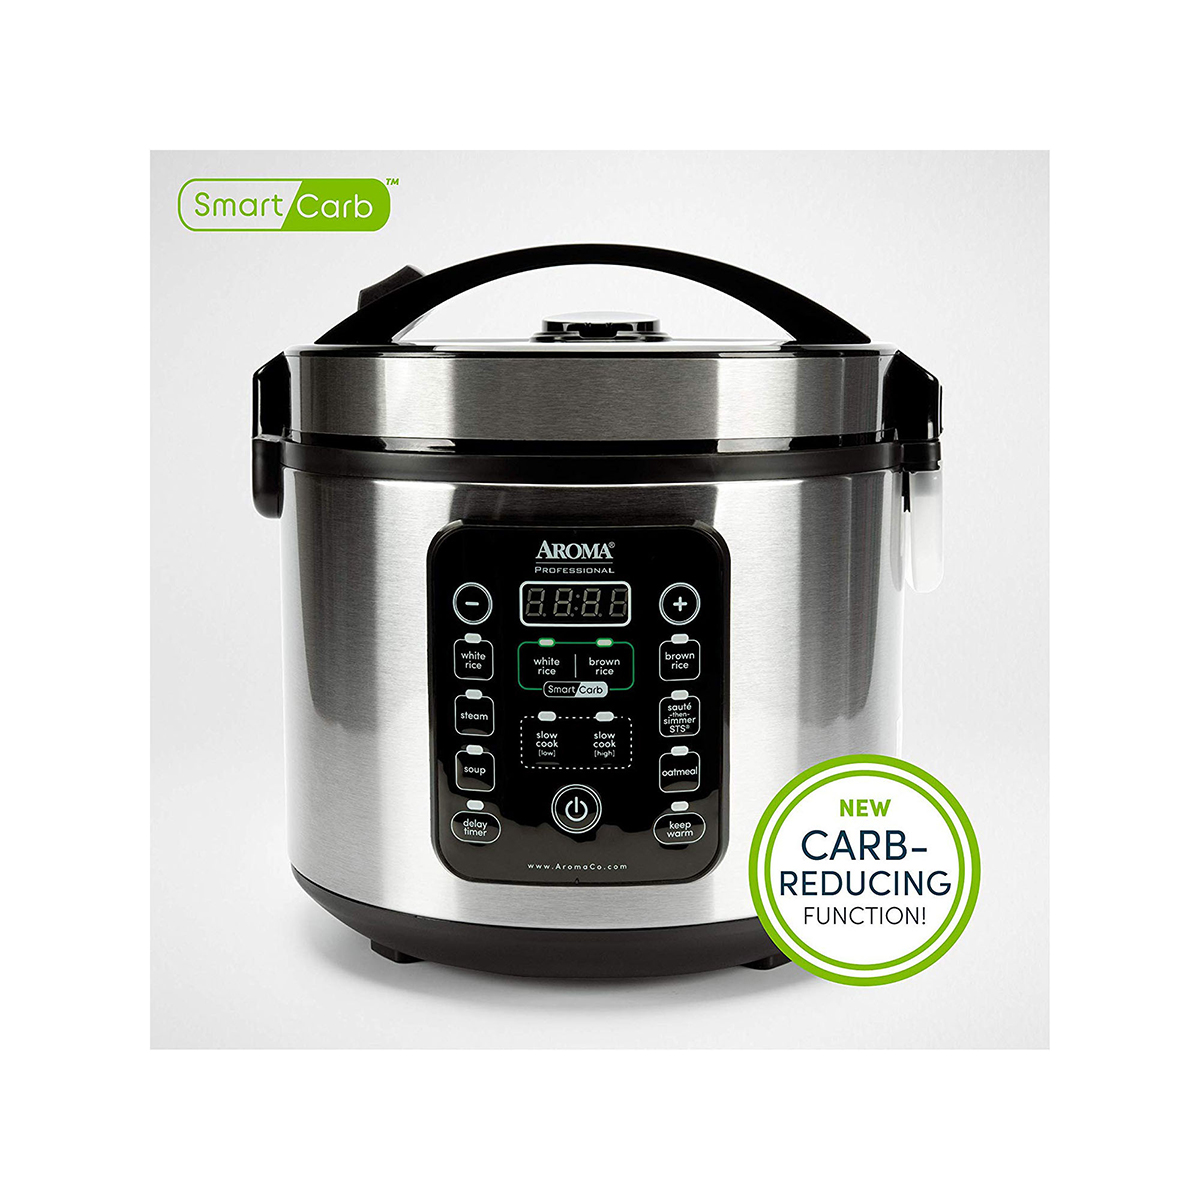 Aroma SmartCarb Digital Rice Cooker And Food Steamer